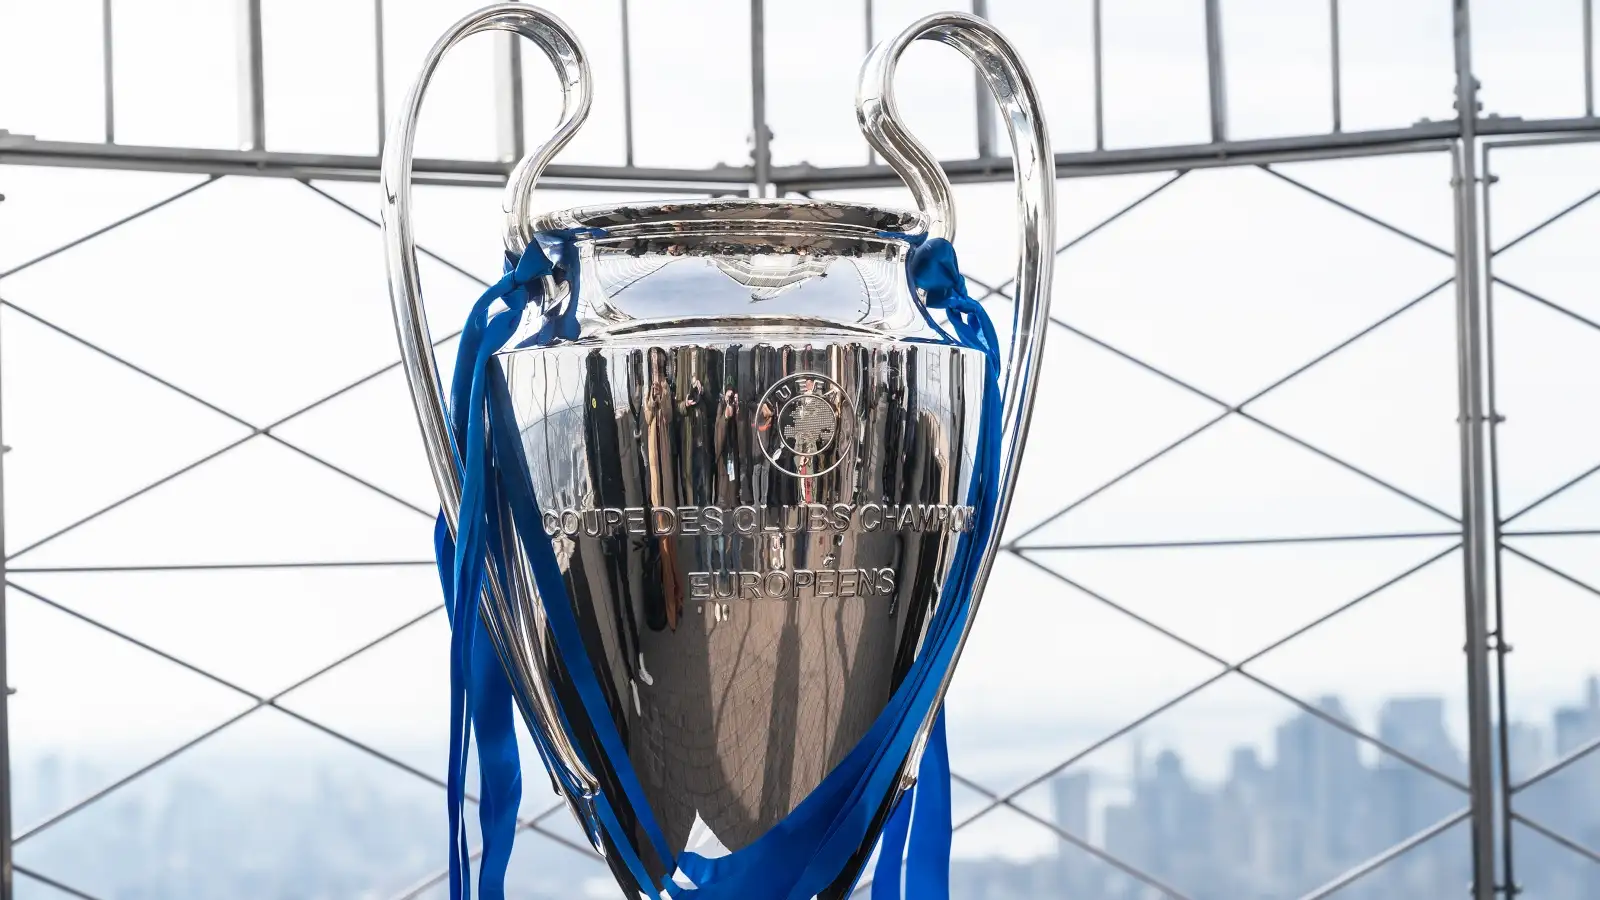 Champions League trophy on display